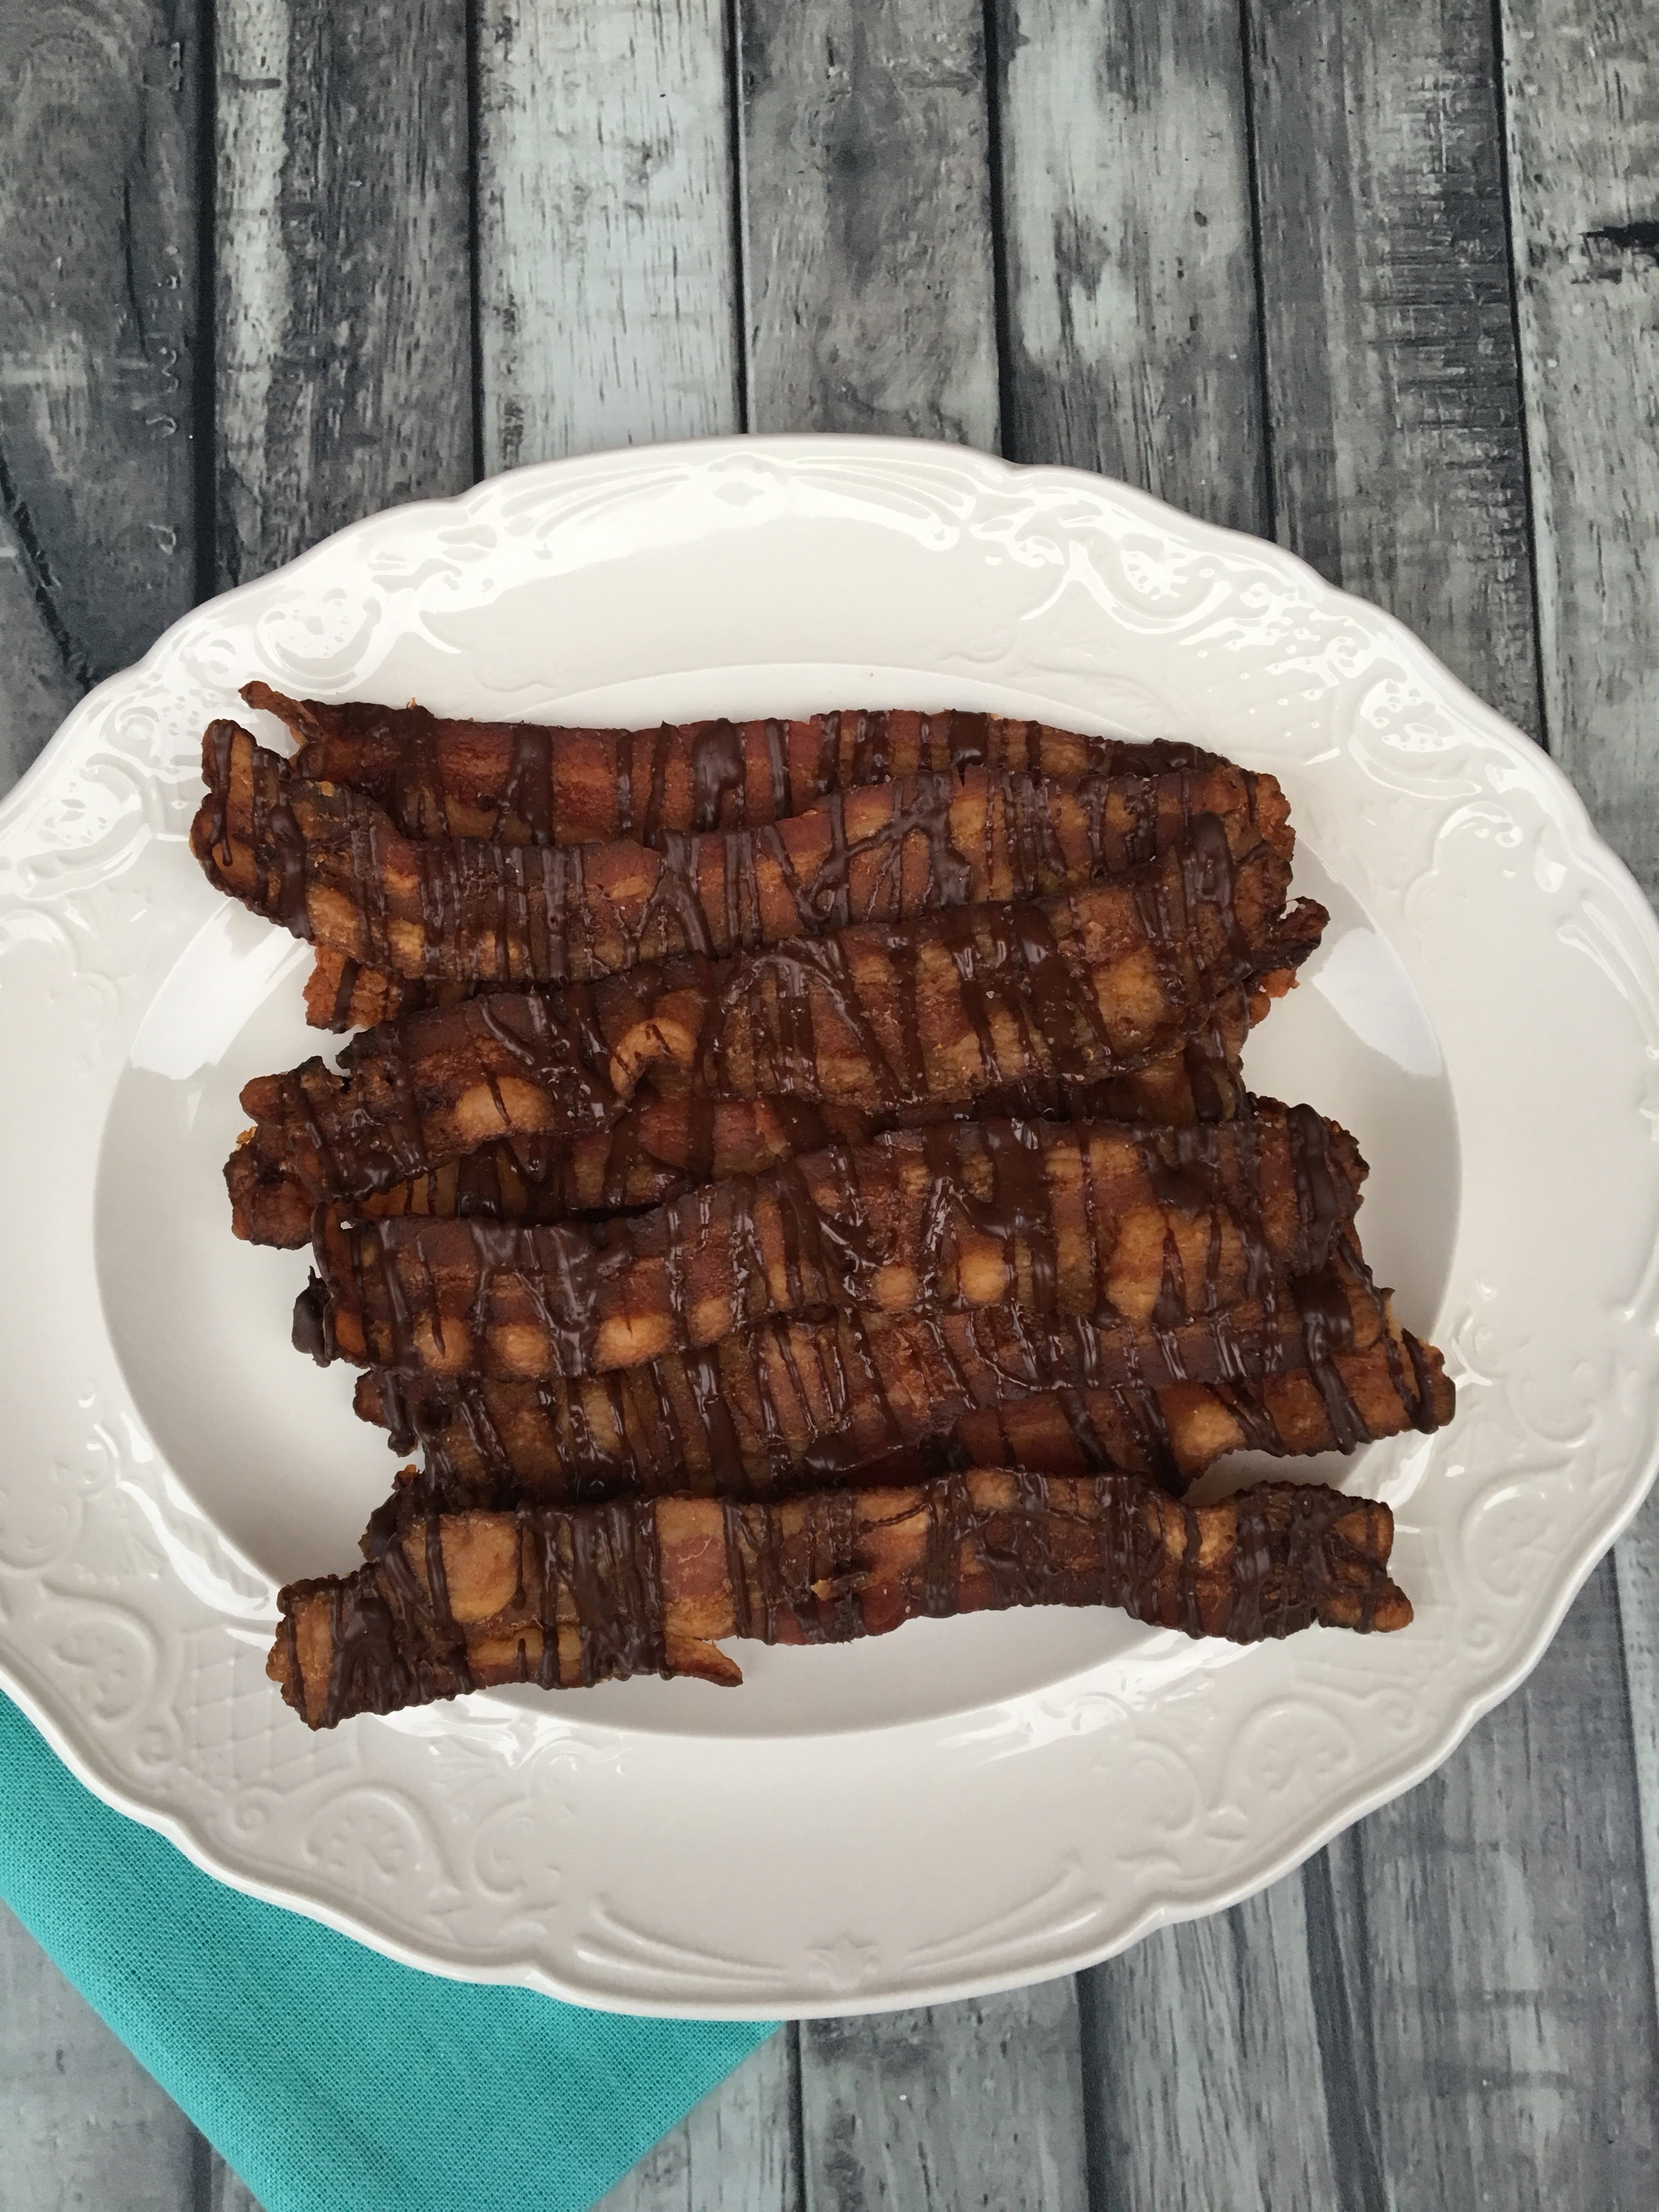 Chocolate Covered Bacon is the Keto Friendly recipe that you didn't know you needed in your life until now.  Bacon and chocolate are perfect for cravings! An ideal keto diet snack or low carb appetizer that everyone will love. A bacon lovers recipe for sure!